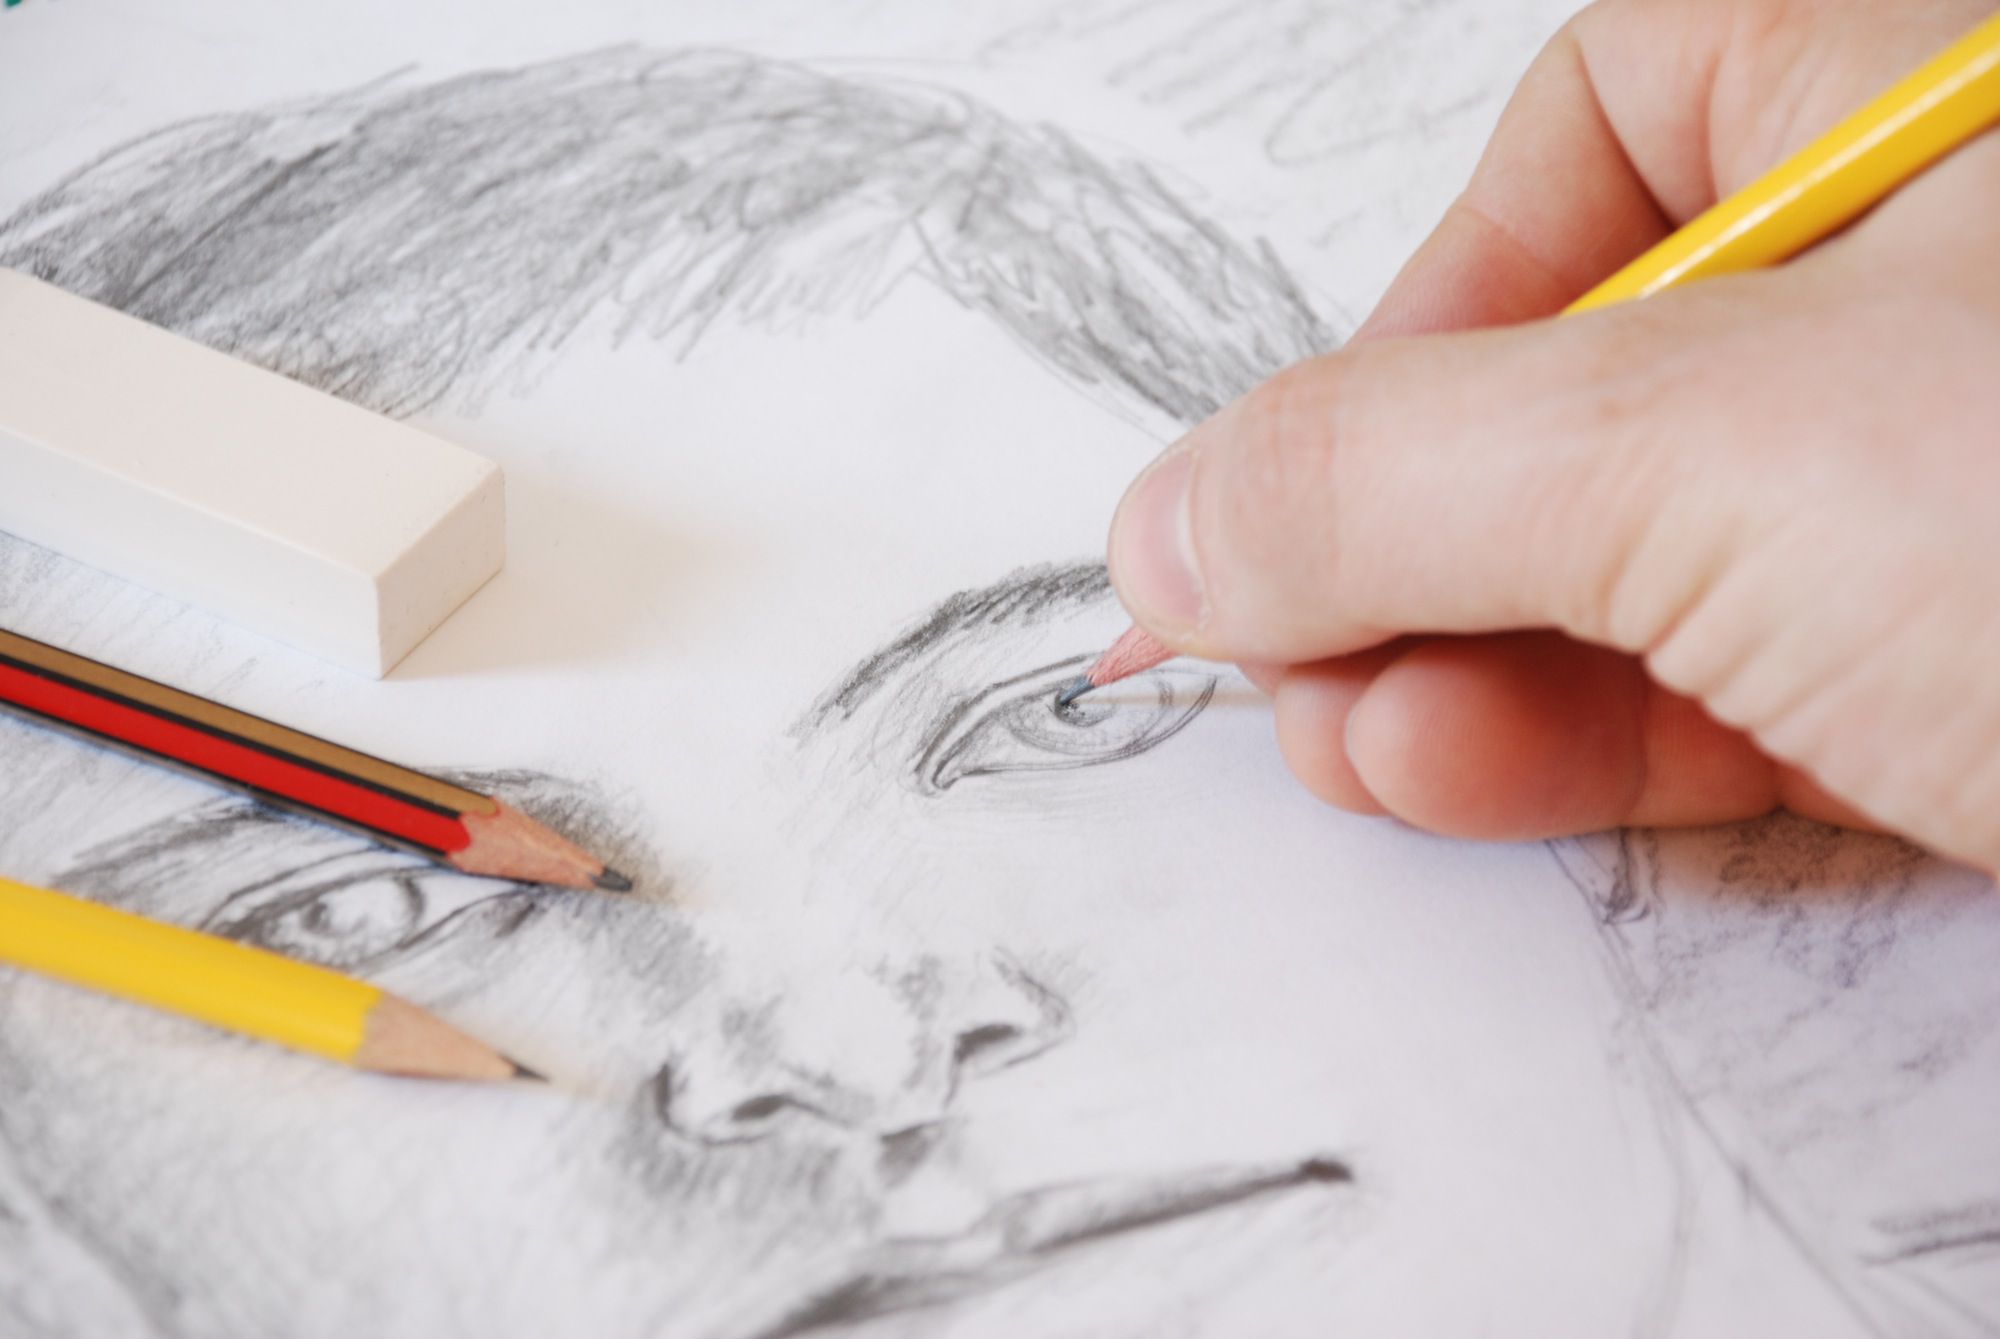  Sketch Picture Of A Actor That A Child Can Draw with Realistic